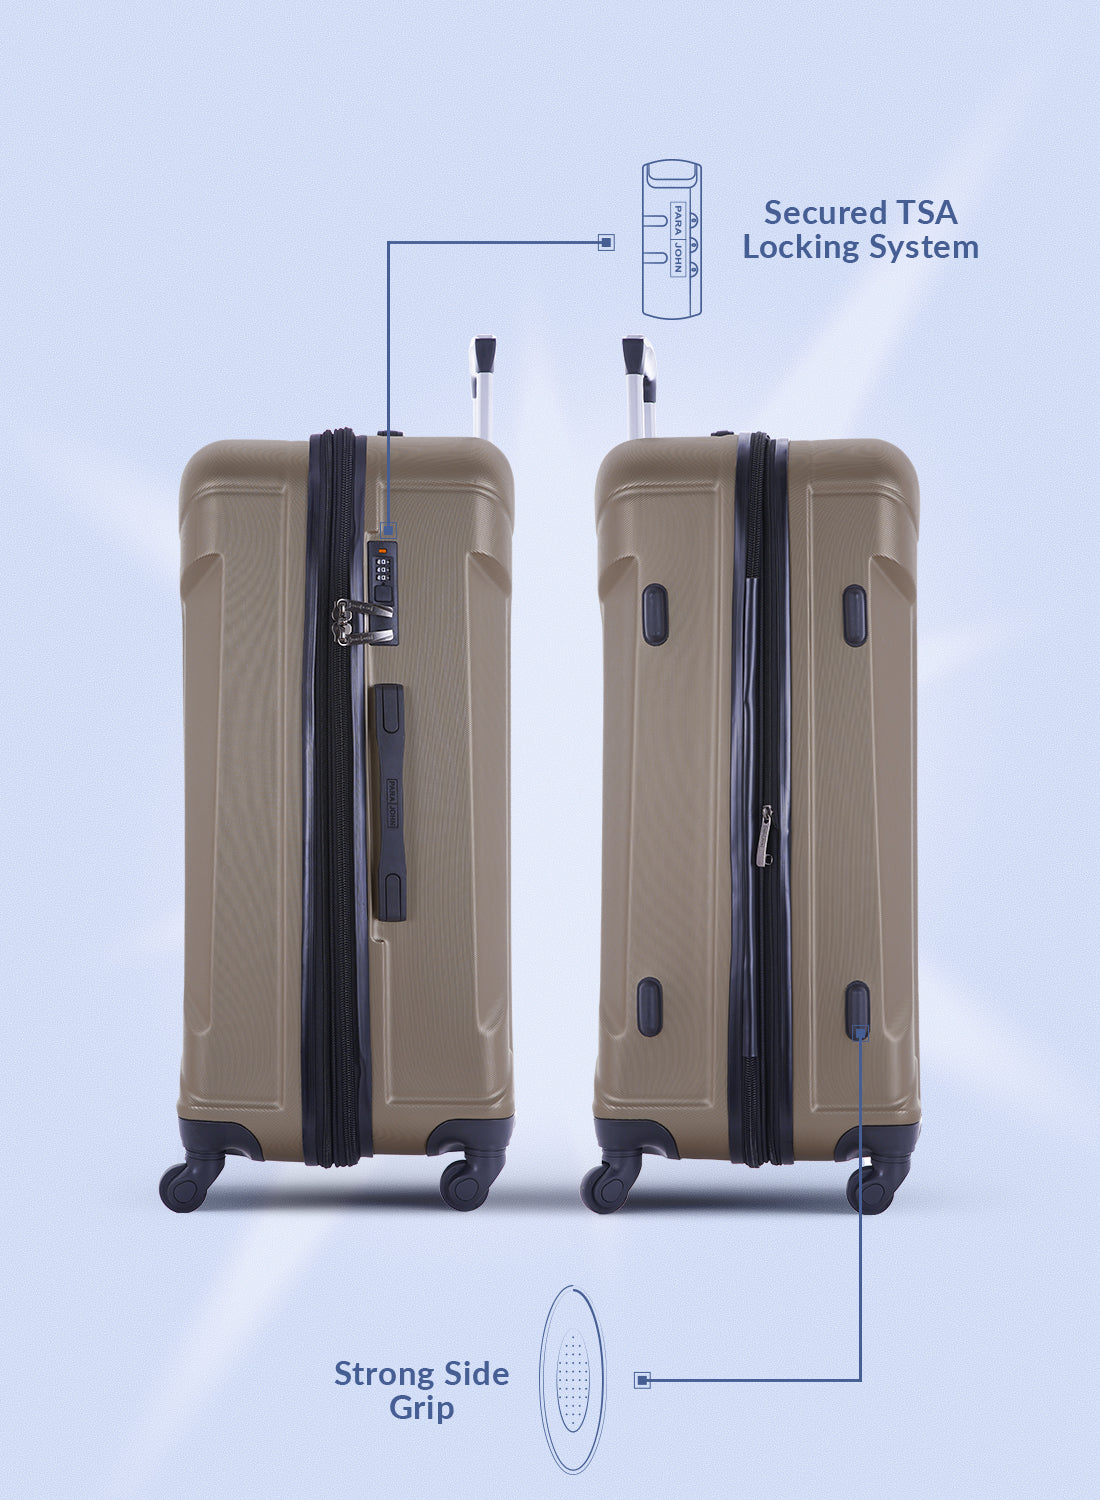 Parajohn Travel Luggage Suitcase Set of 4 -  Trolley Bag, Carry On Hand Cabin Luggage Bag - Lightweight Travel Bags with 360 Durable 4 Spinner Wheels - Hard Shell Luggage Spinner - (20'', ,24'', 28'', 32'')